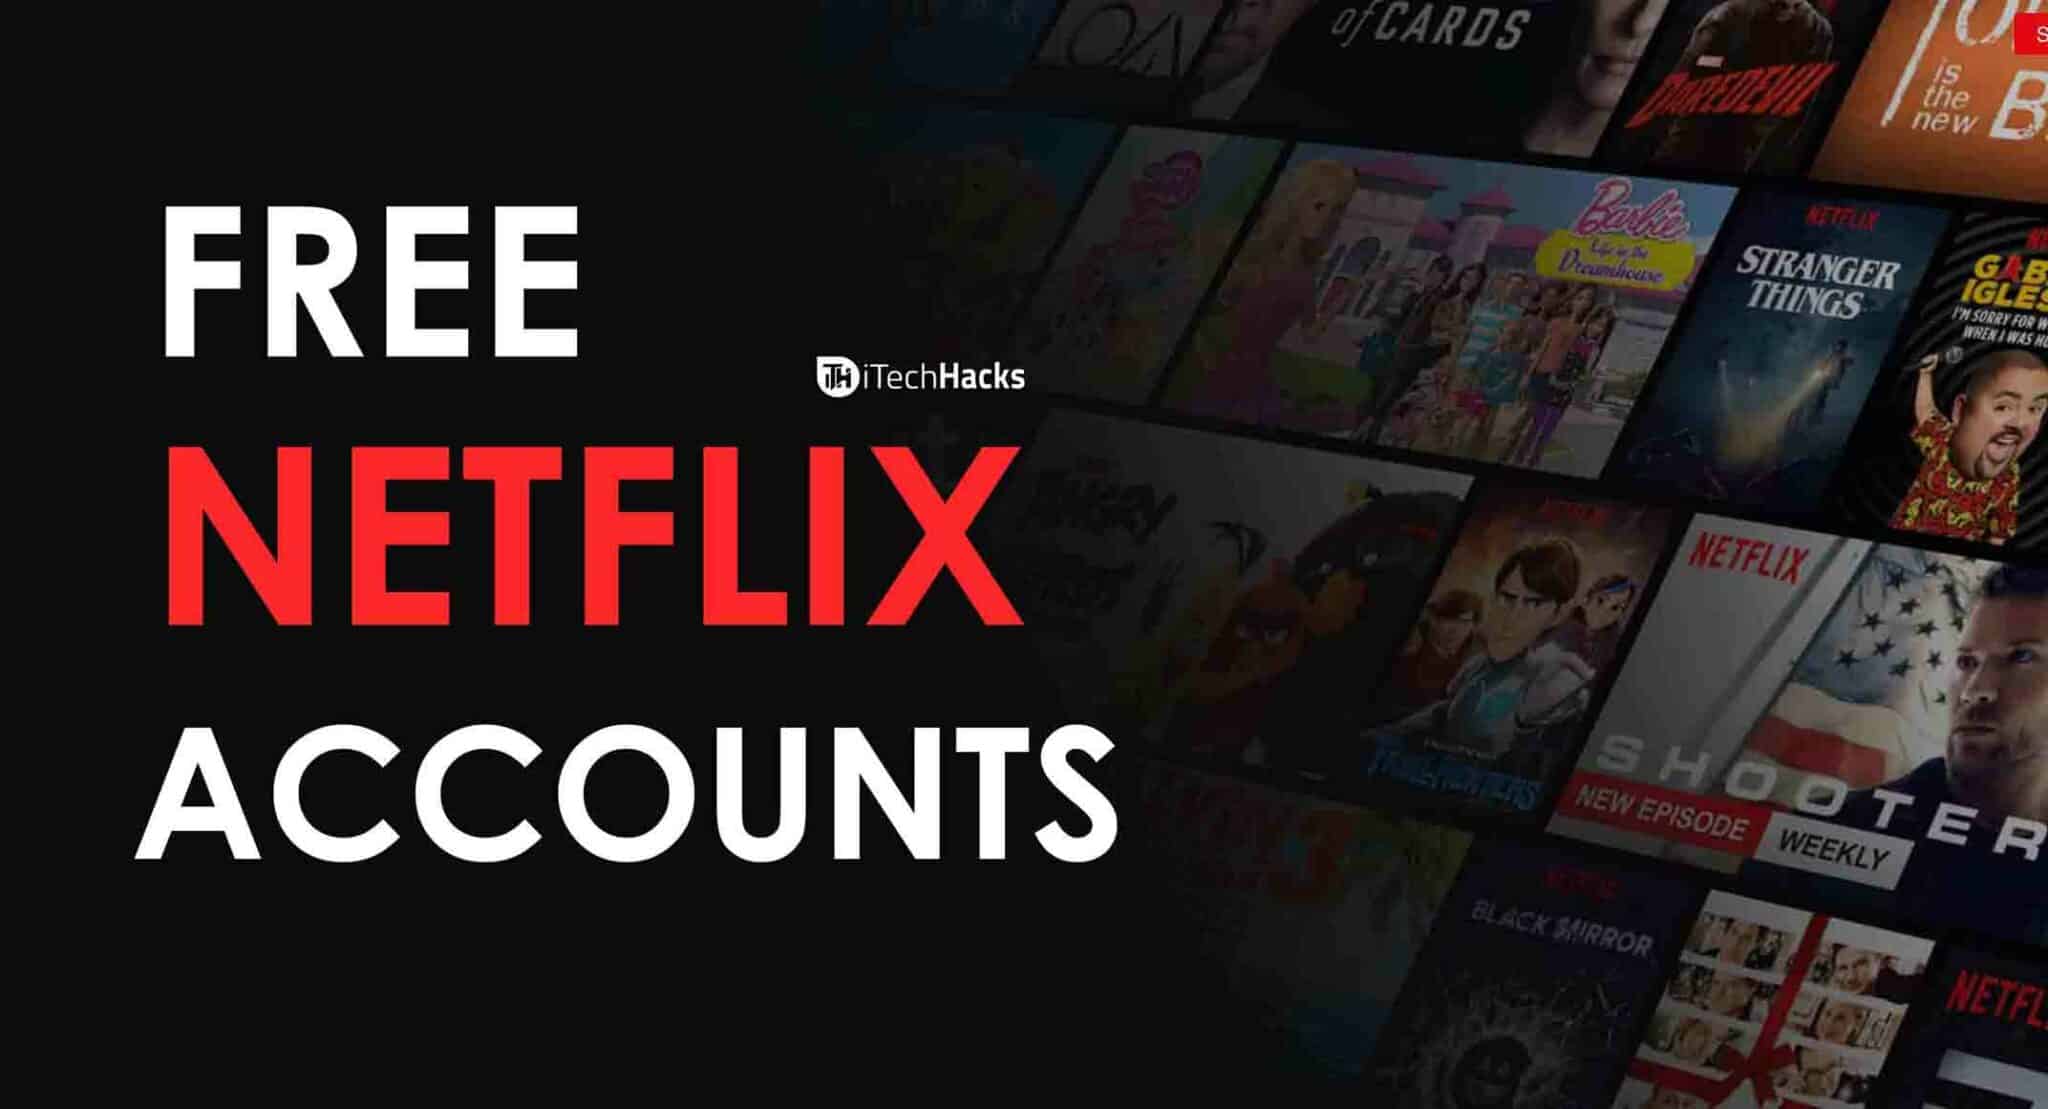 Beware of free Netflix account subscription scam